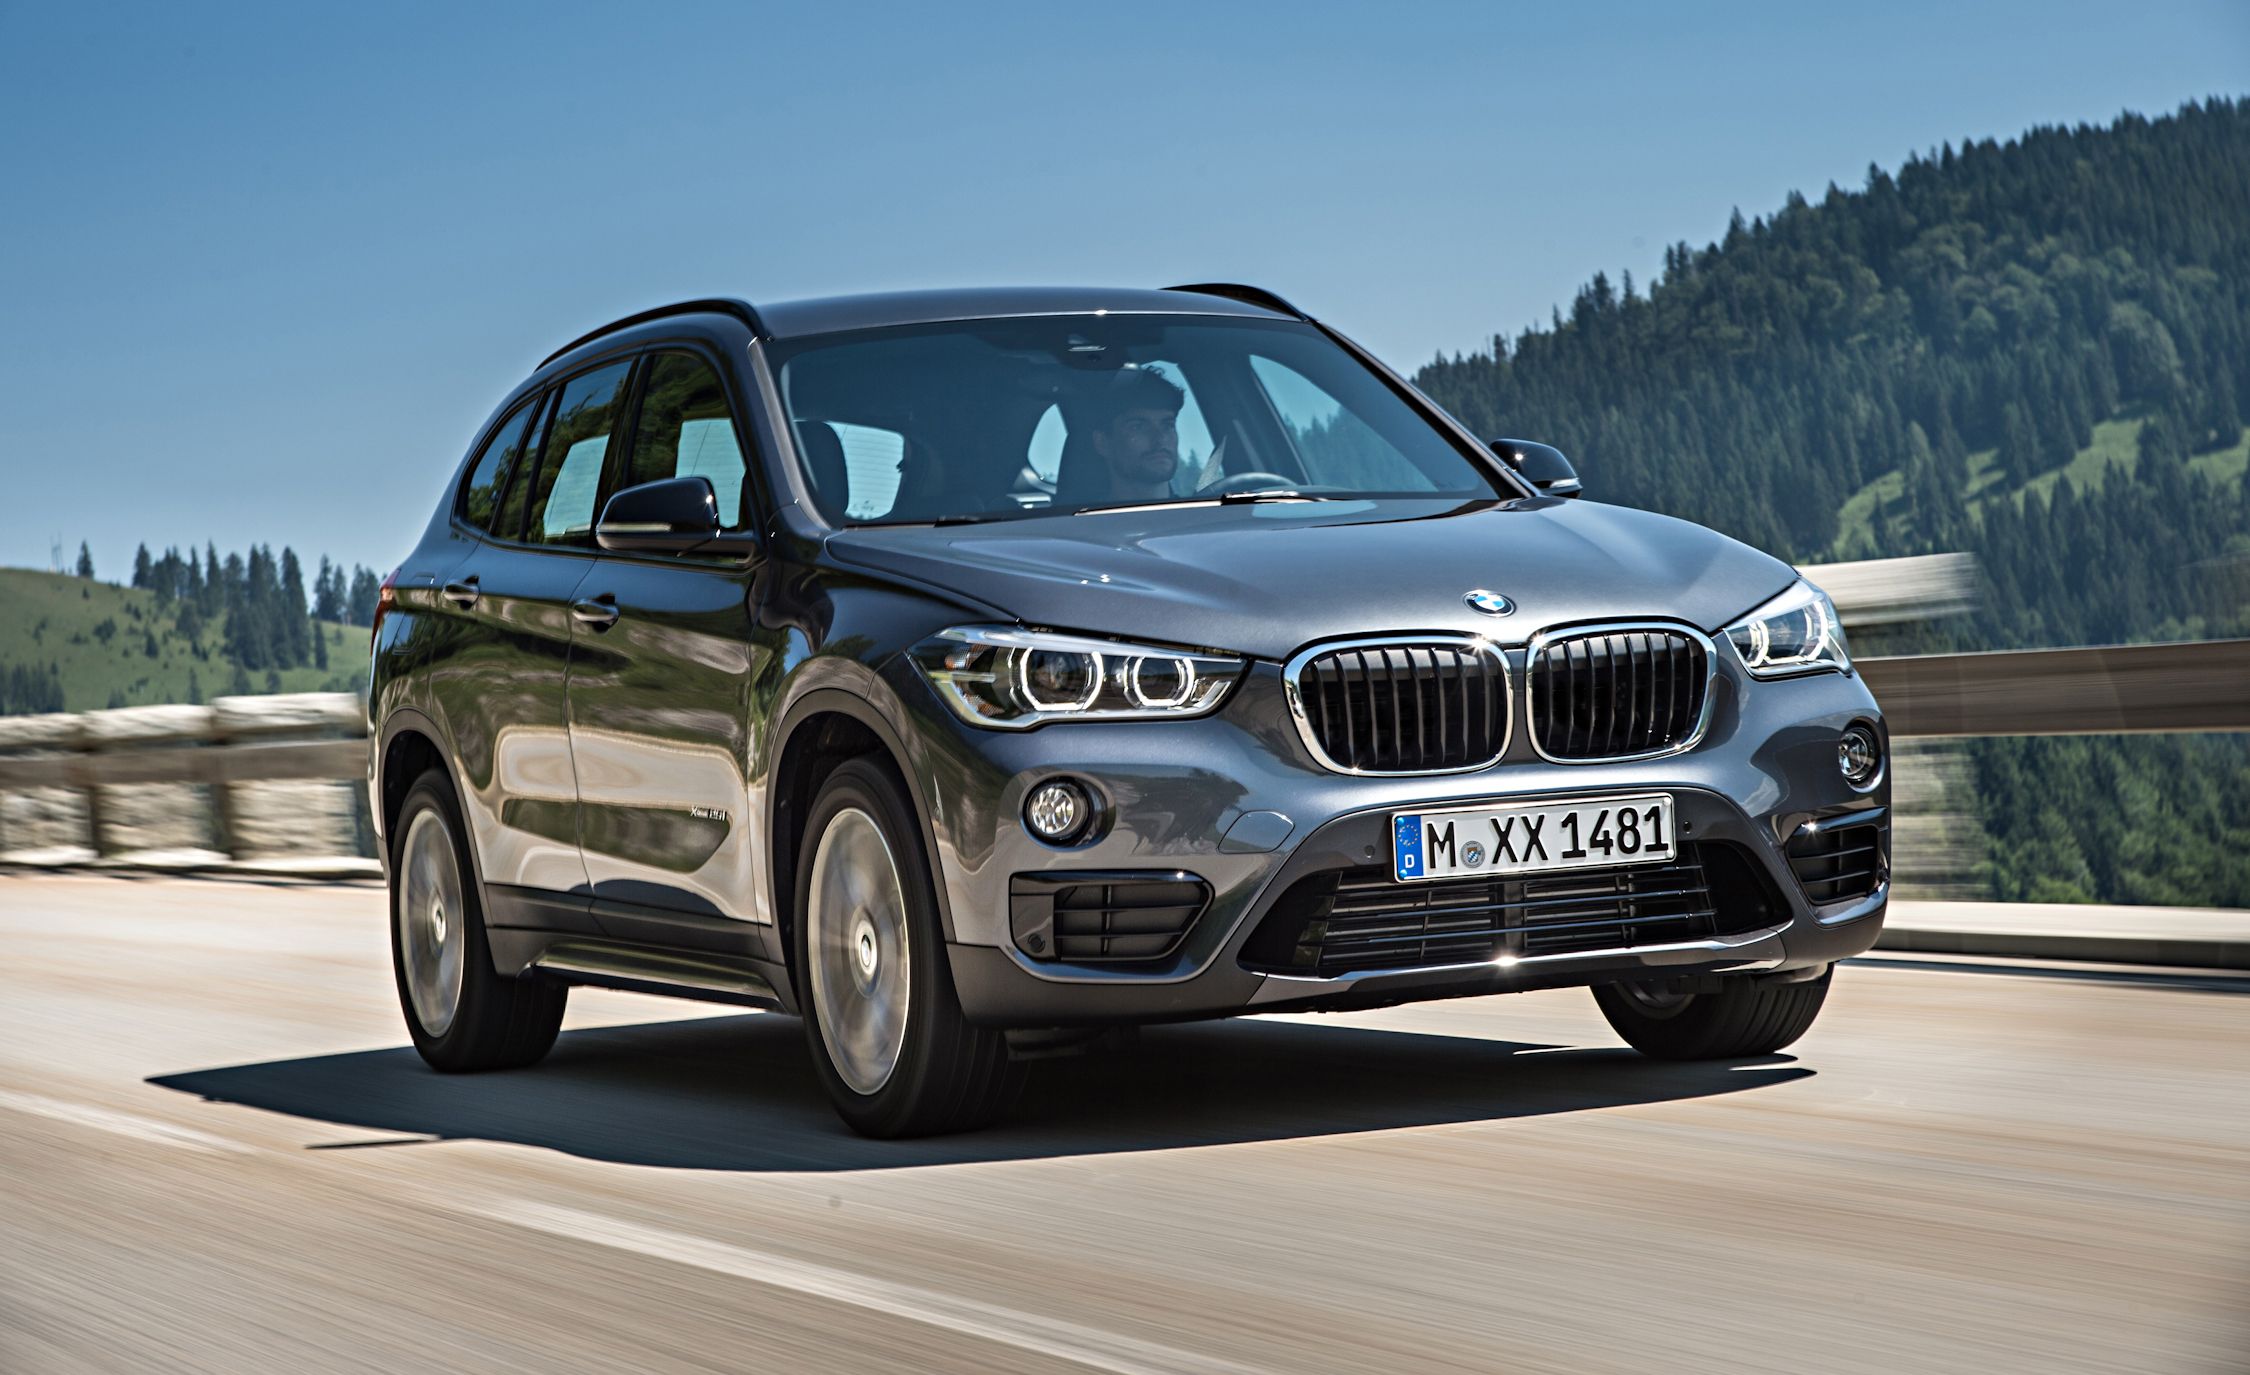 BMW X1 Reviews BMW X1 Price, Photos, and Specs Car and Driver